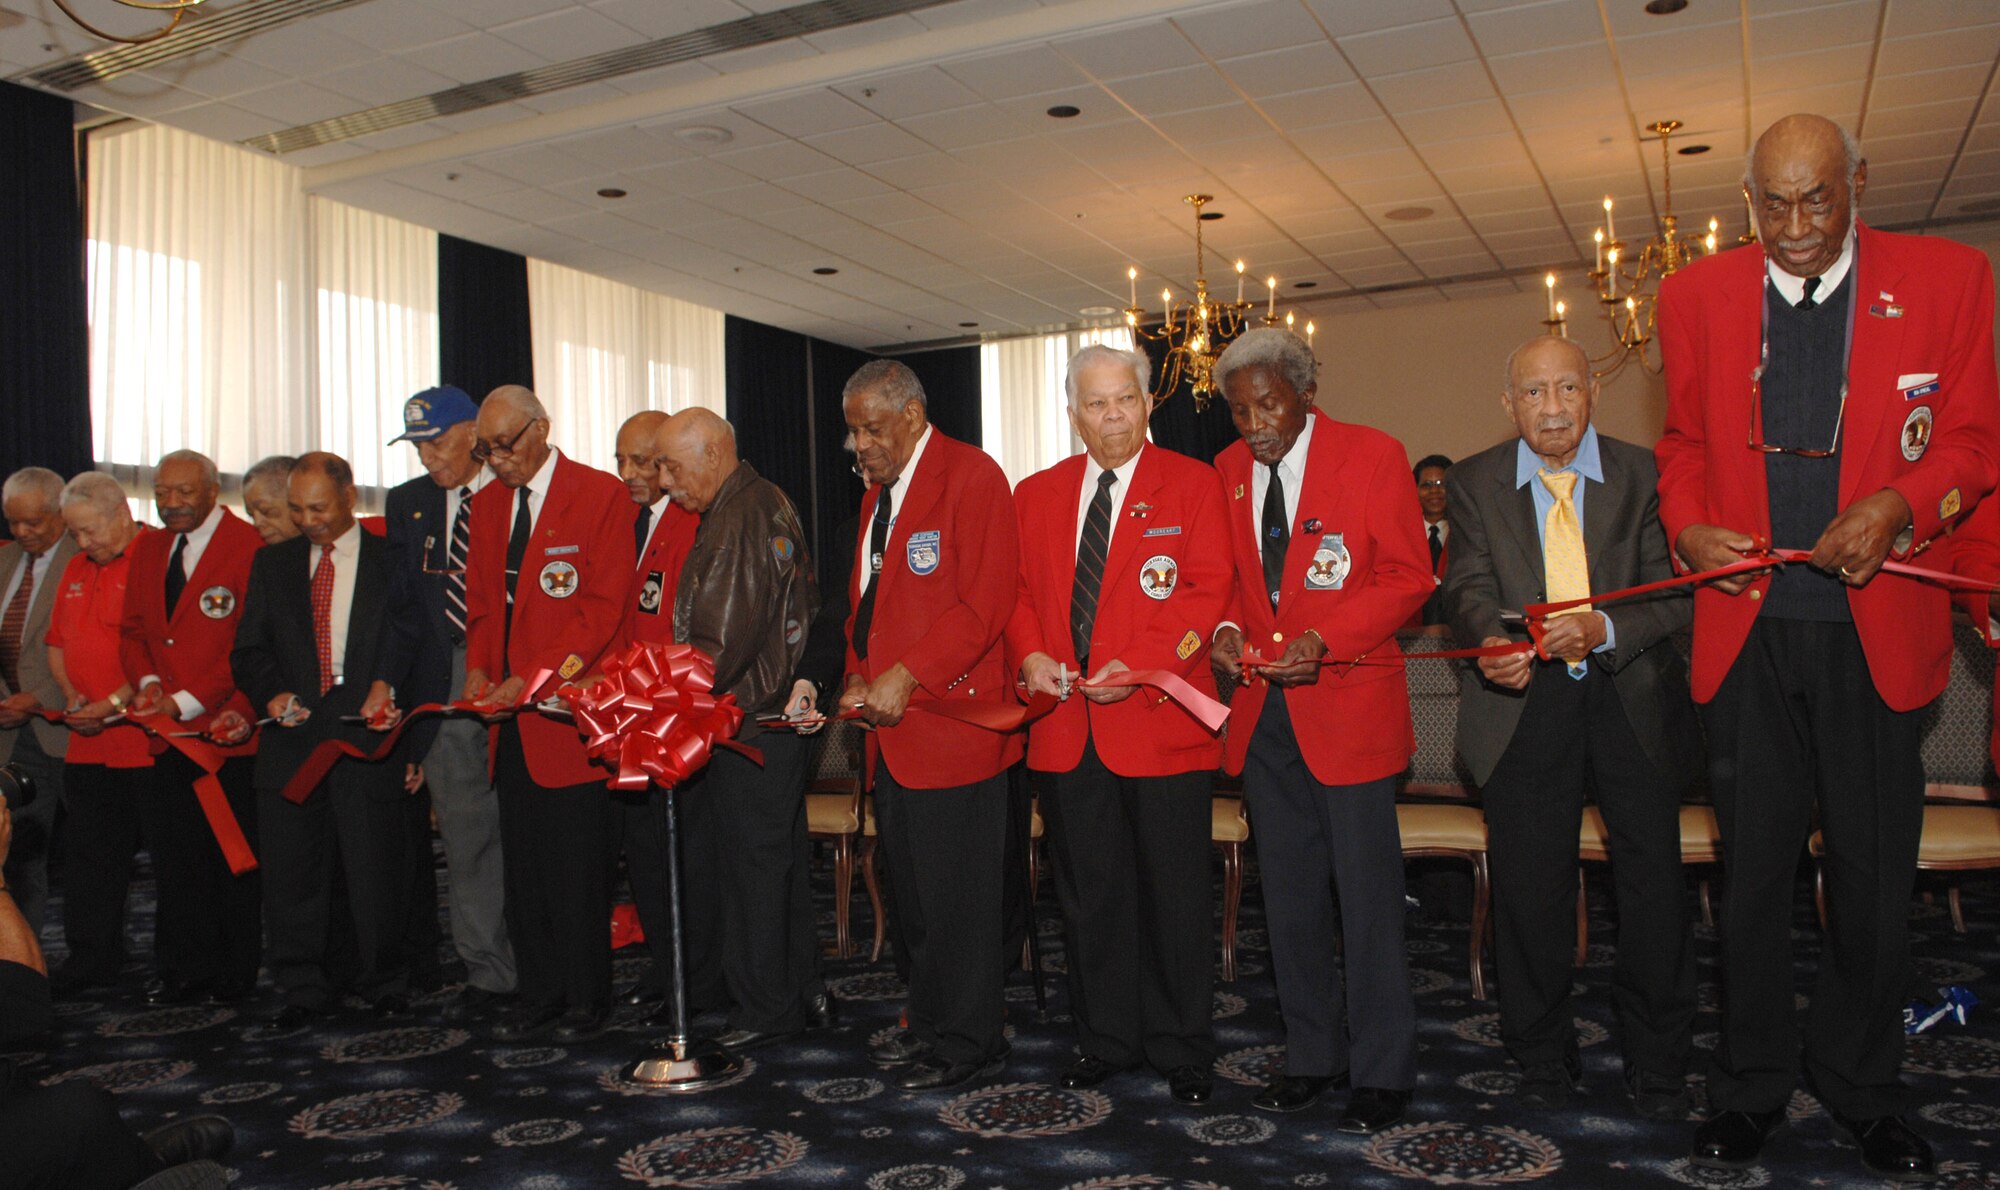 Original members of the Tuskegee Airmen cut the ribbon at the dedication ceremony of the "Tuskegee Room" at the Bolling Air Force Base Club in Washington, D.C., March 28. The Tuskegee Airmen received the Congressional Gold Medal from President George W. Bush March 29, the highest civilian honor bestowed by Congress. (U.S. Air Force photo/Airman 1st Class Timothy Chacon)